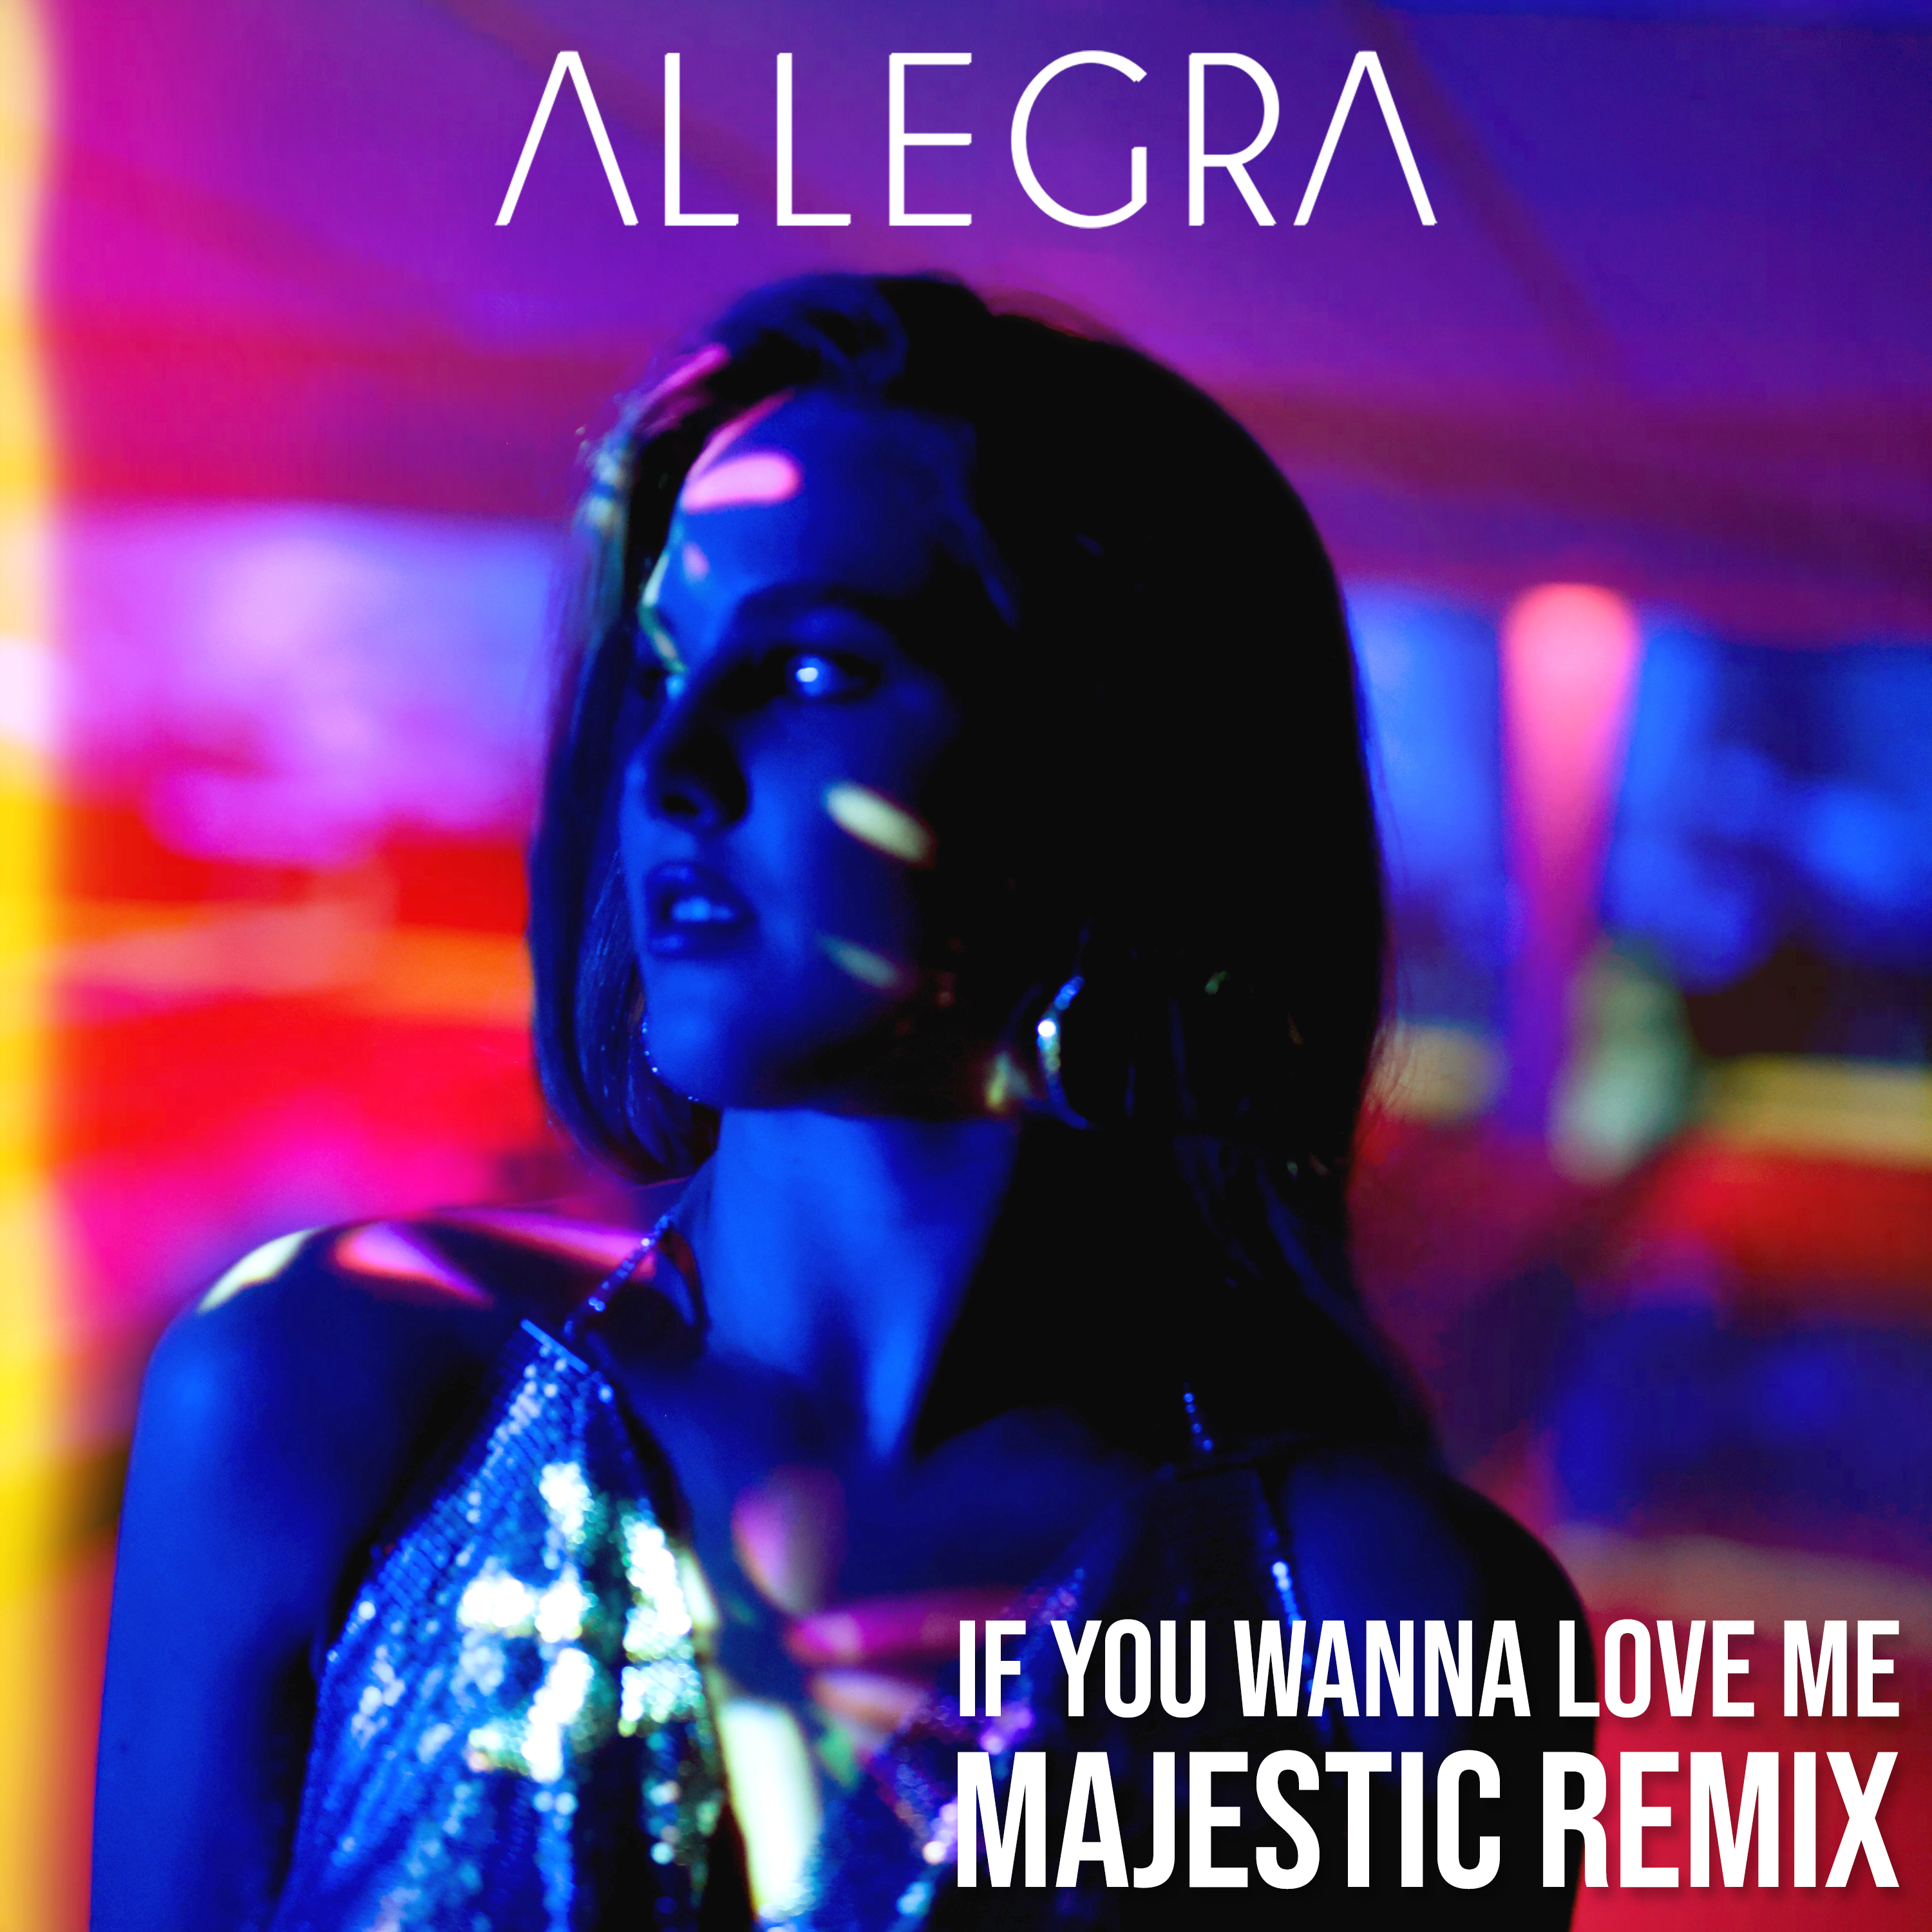 Allegra - If You Wanna Love Me (Majestic Remix) - Cover Art